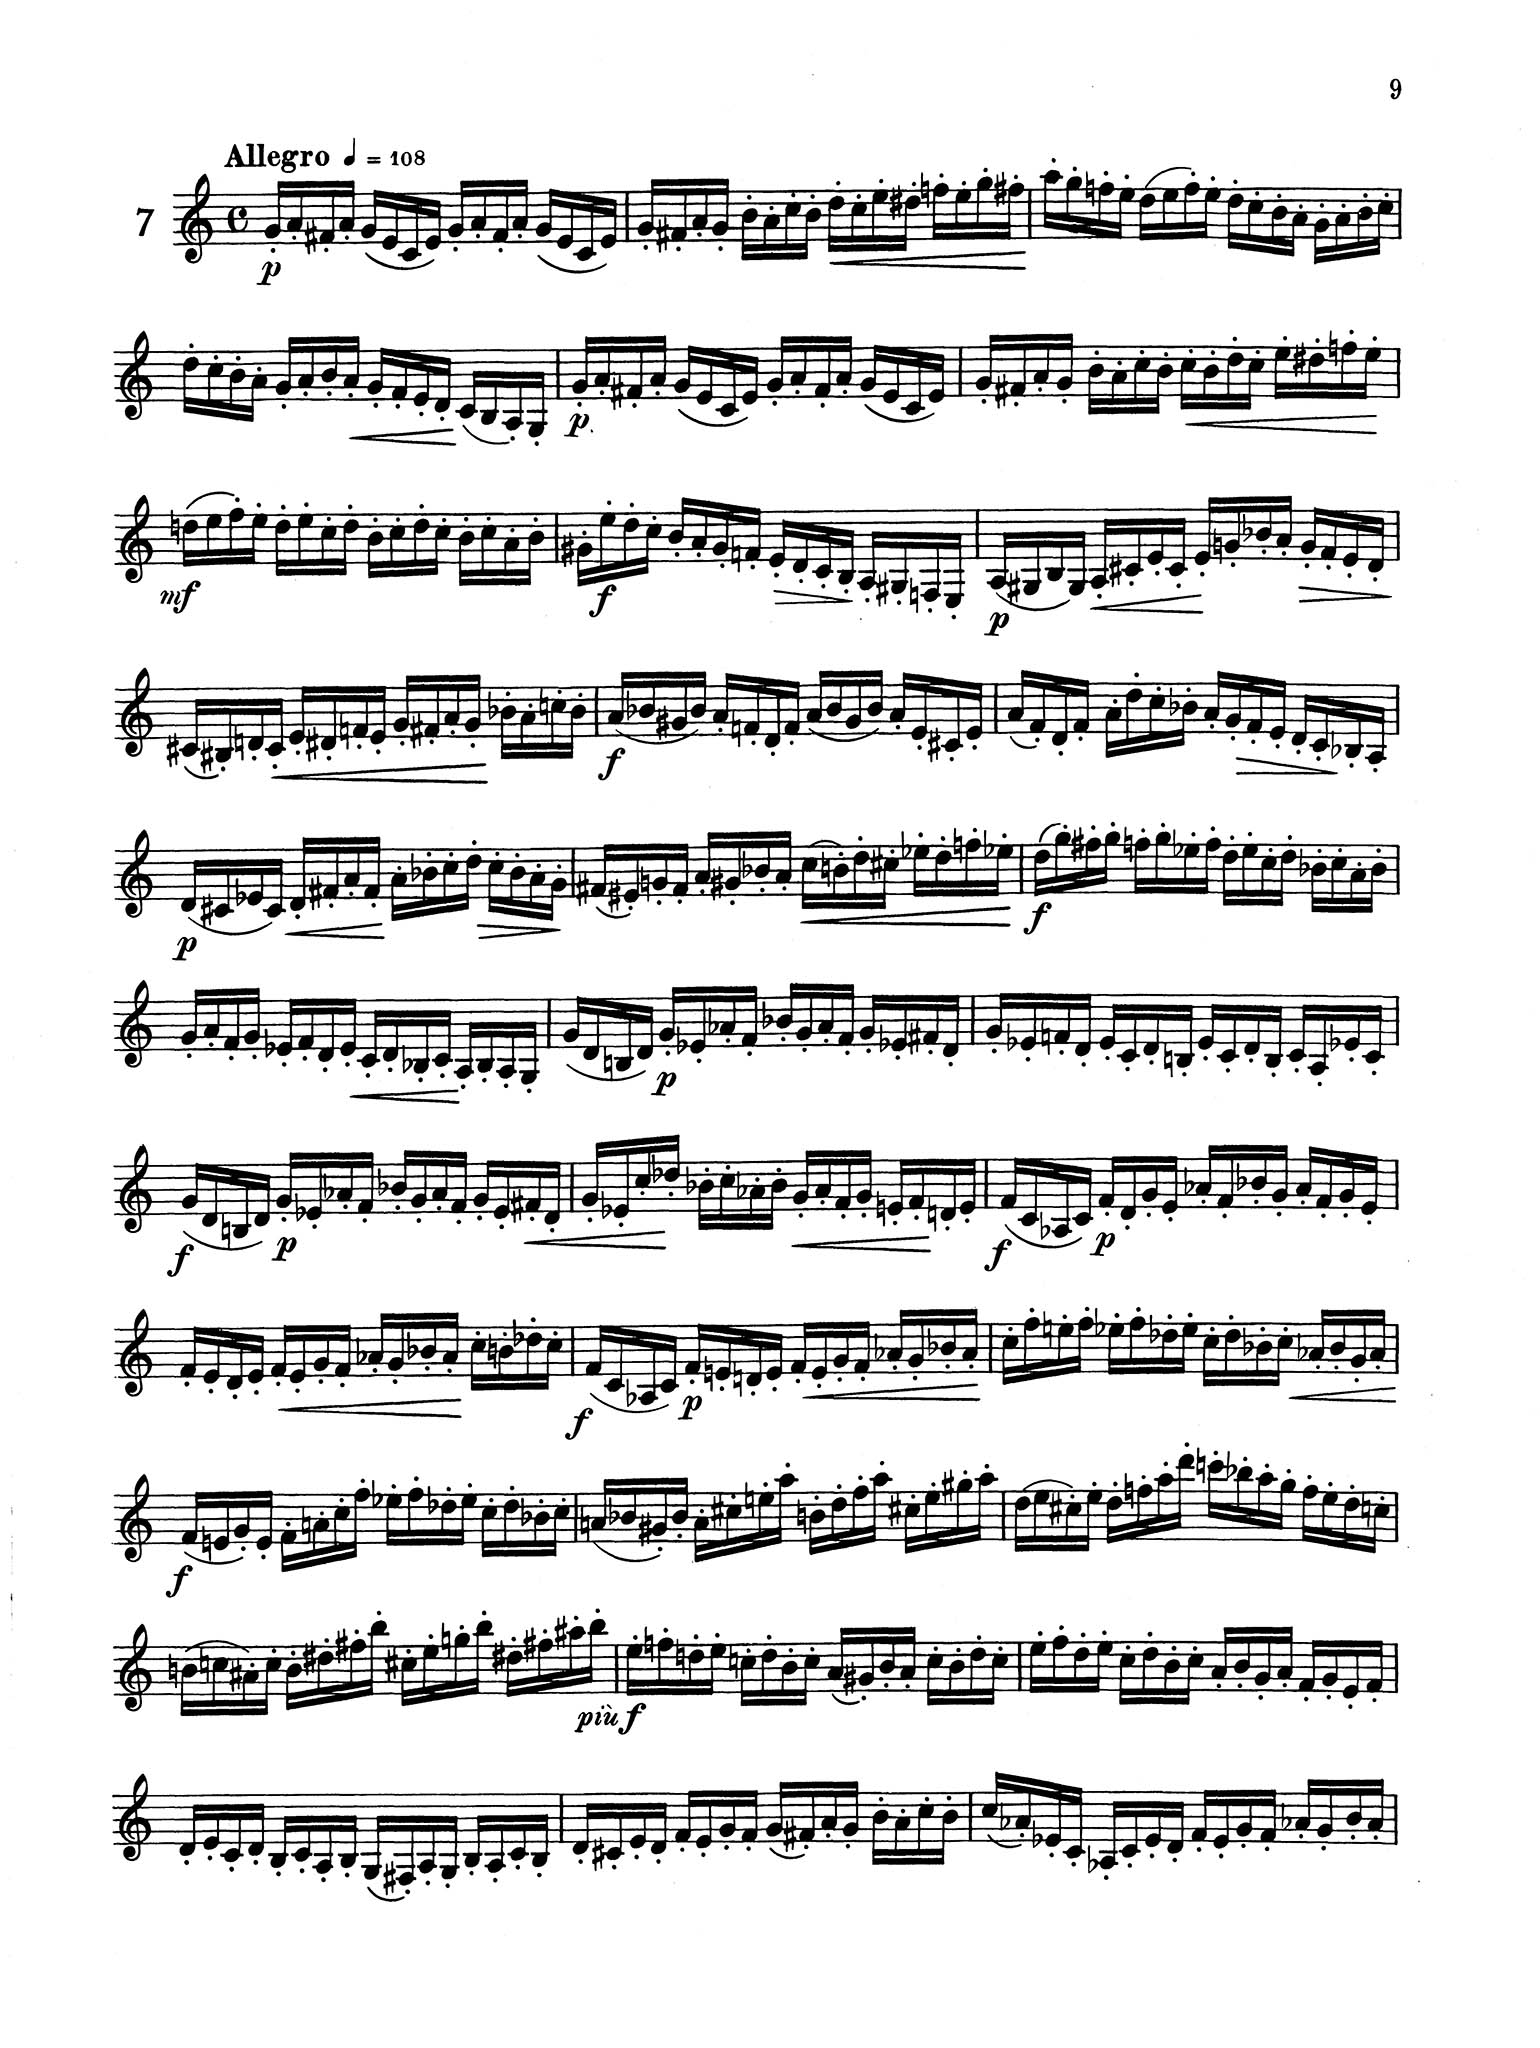 48 Studies for Clarinet: Book 1 of 2 Page 9